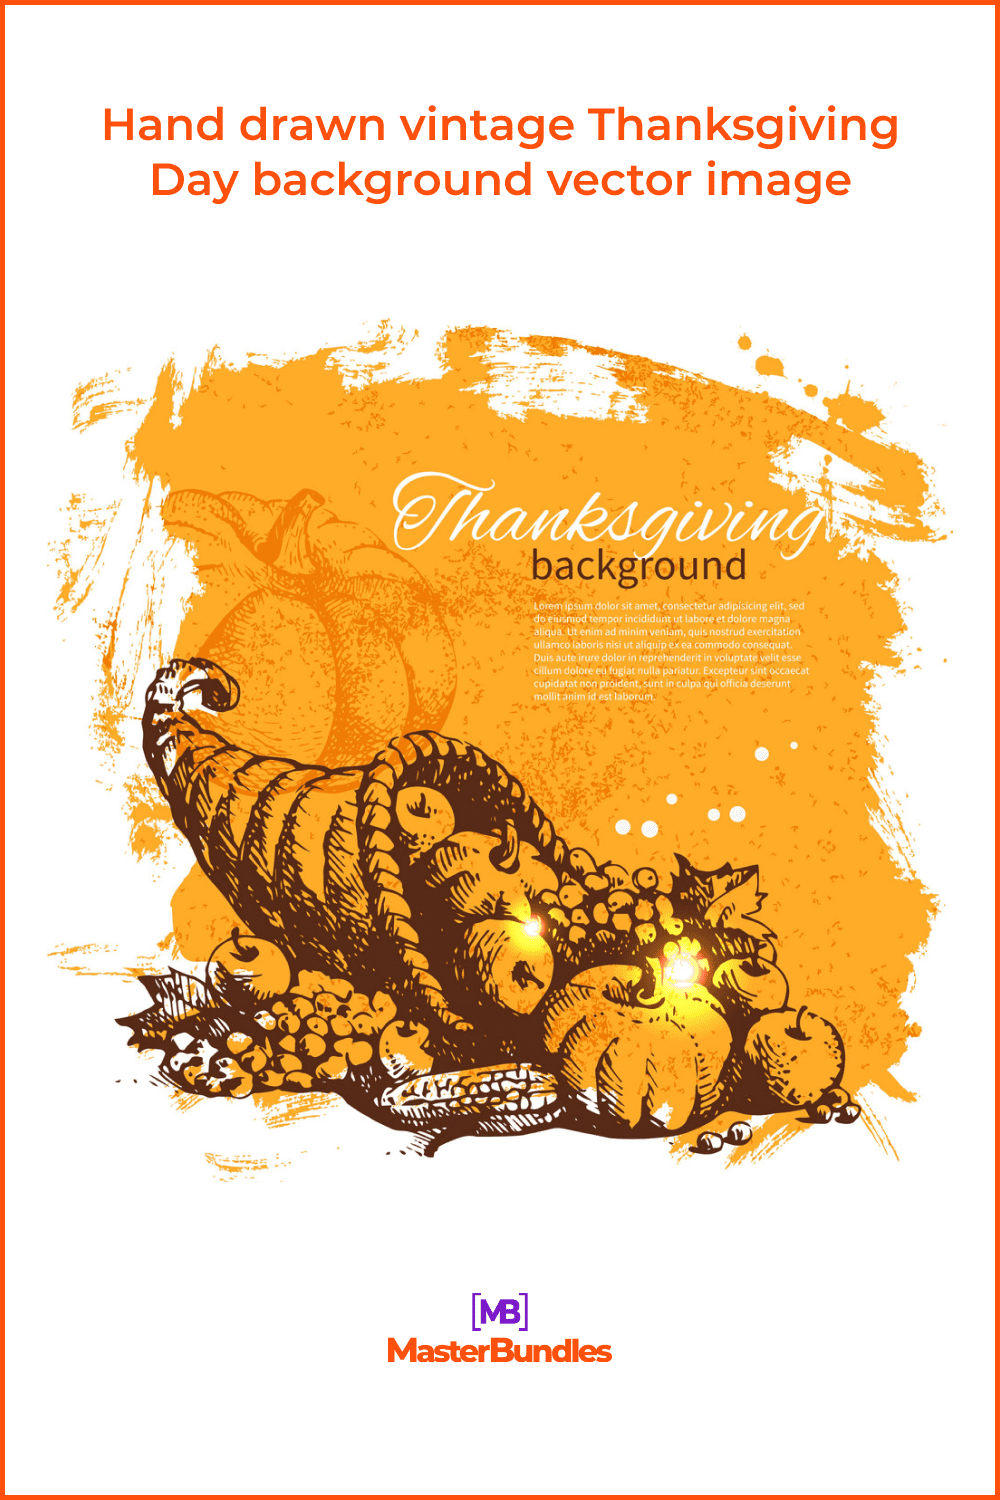 Hand drawn vintage Thanksgiving Day background vector image.